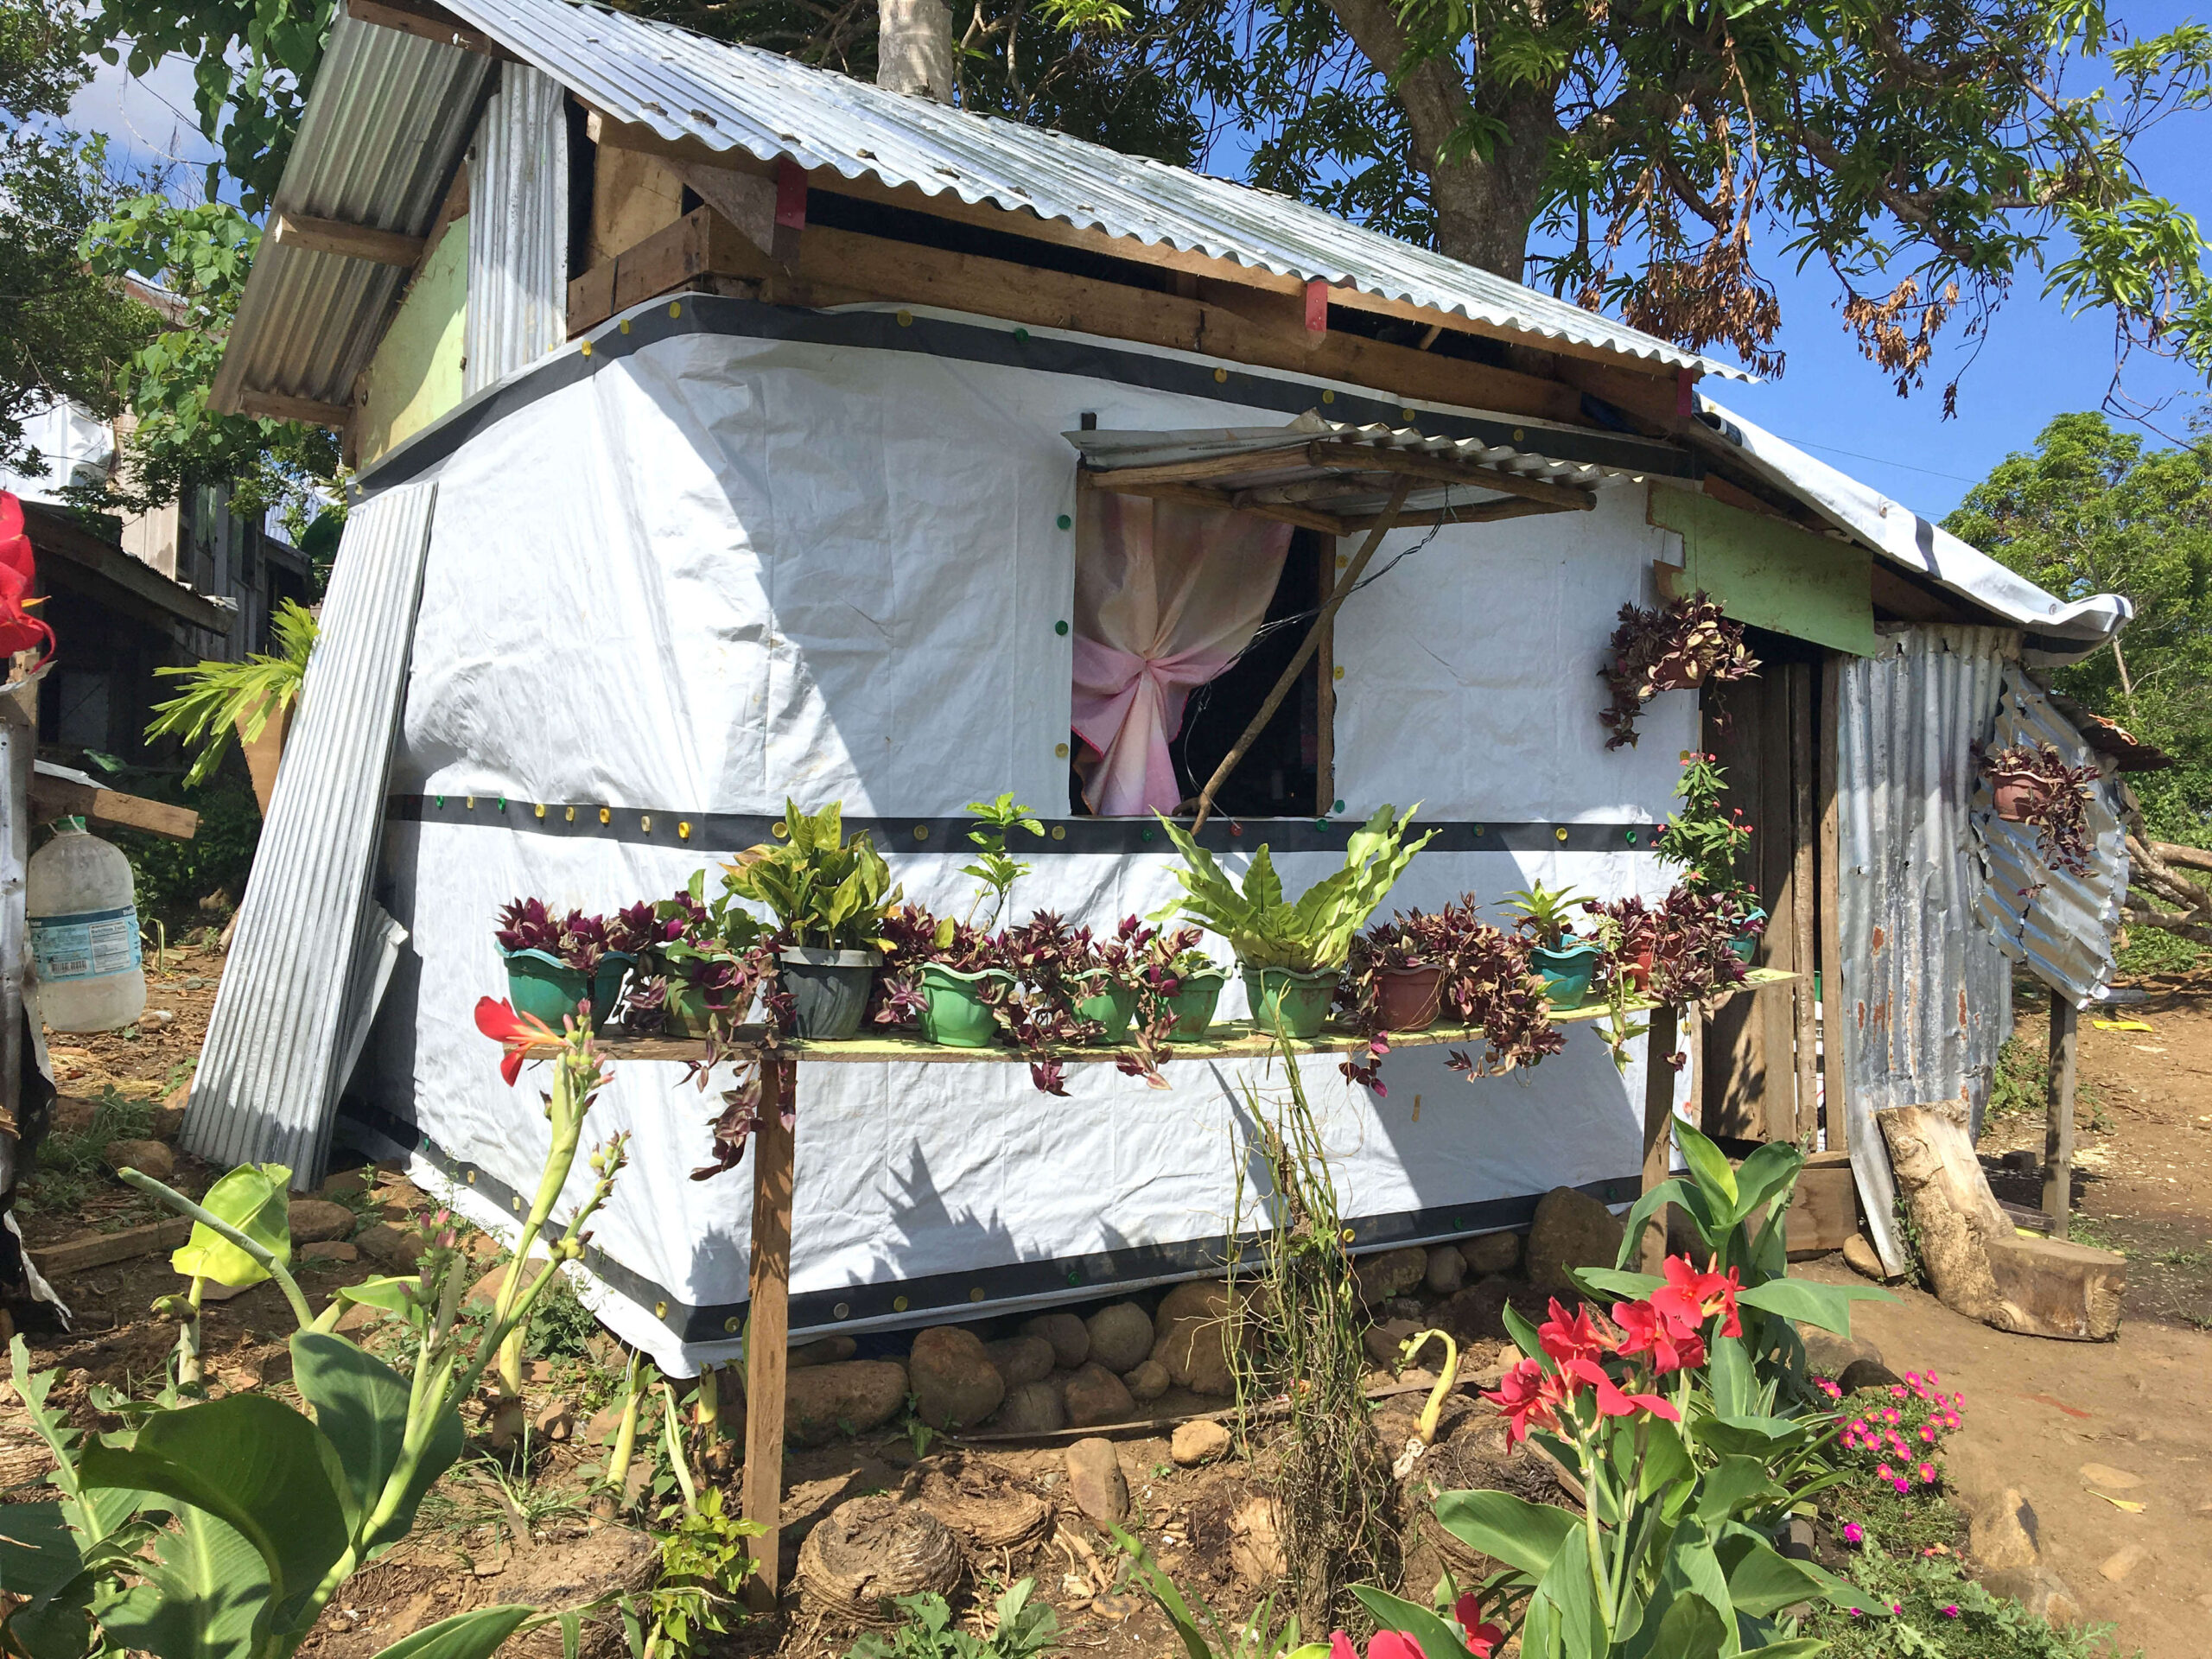 Home constructed with tarpaulins and shelter kit in the Philippines after Typhoon Mangkhut